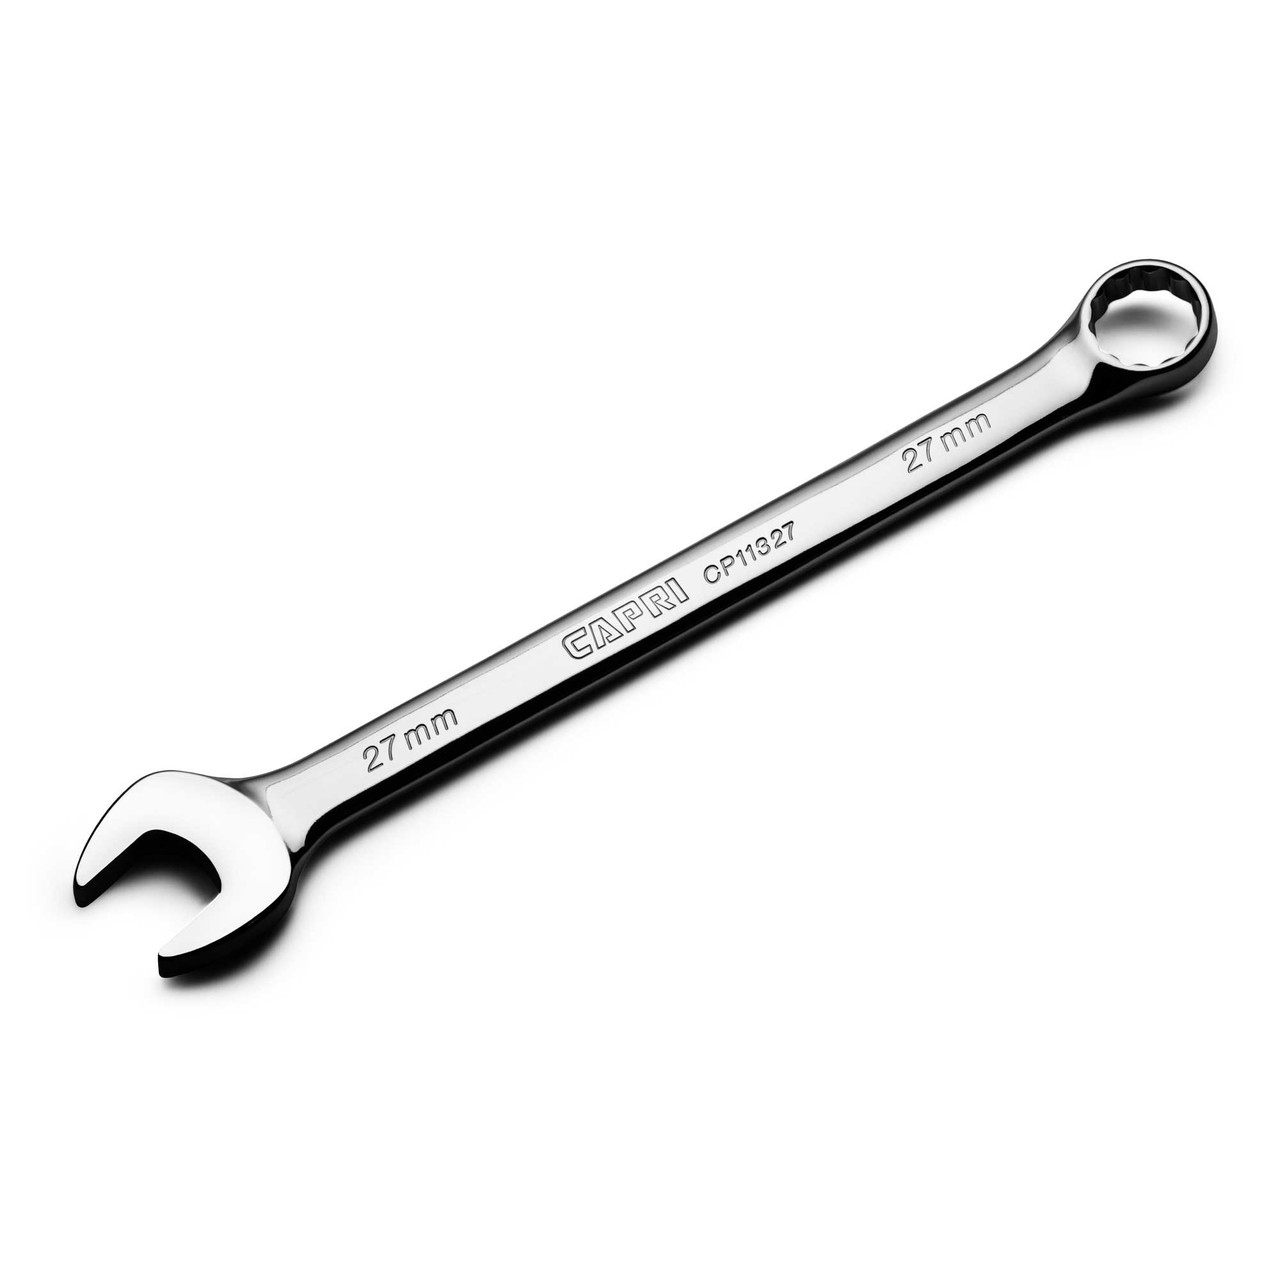 Capri Tools 27 mm Combination Wrench, 12 Point, Metric